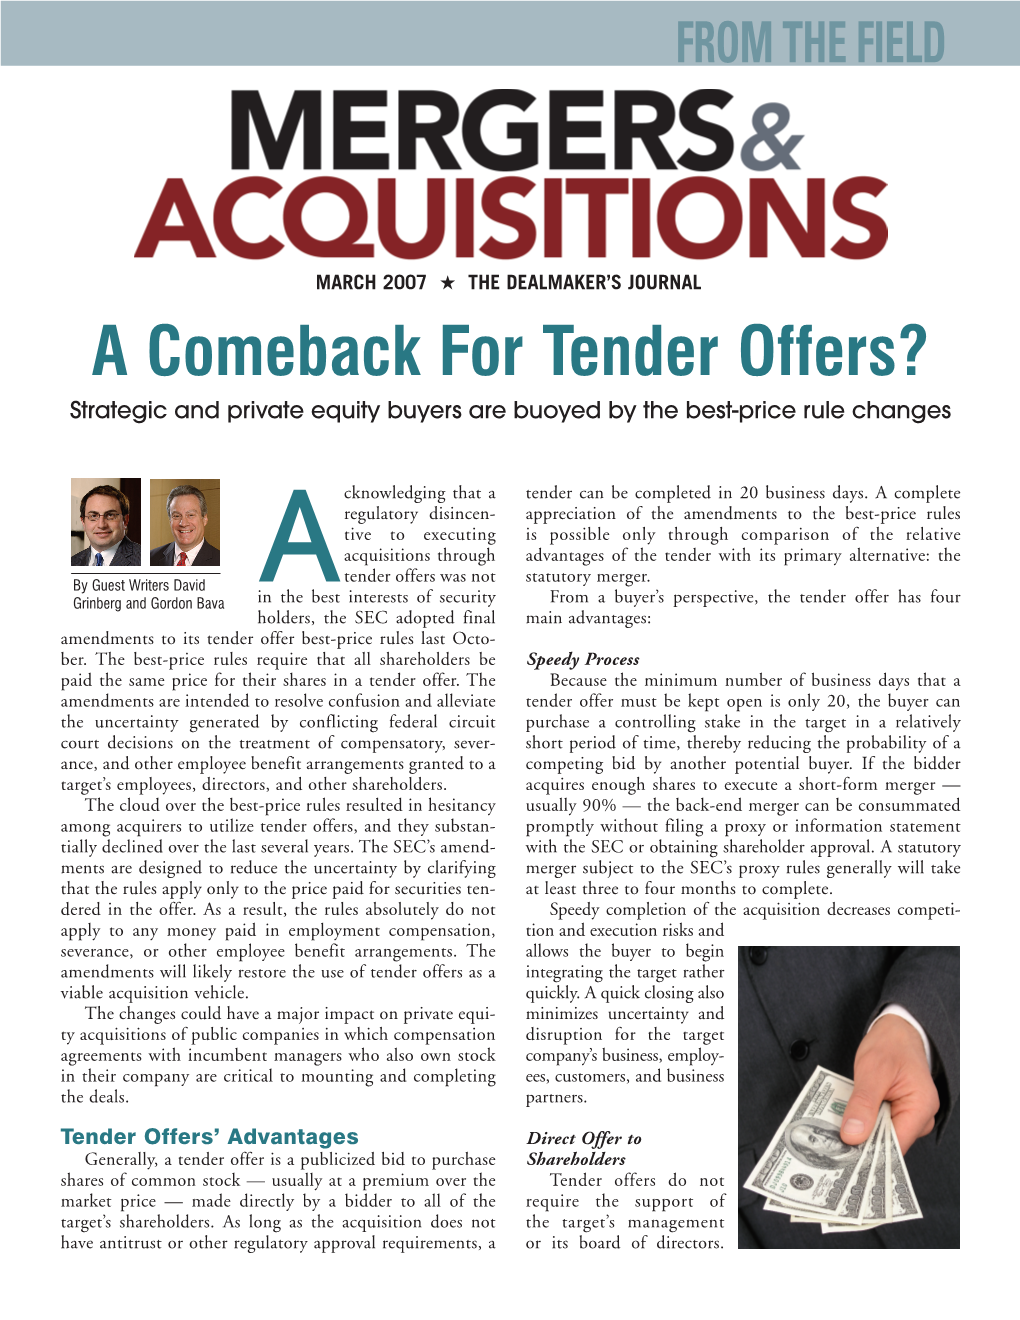 A Comeback for Tender Offers? Strategic and Private Equity Buyers Are Buoyed by the Best-Price Rule Changes